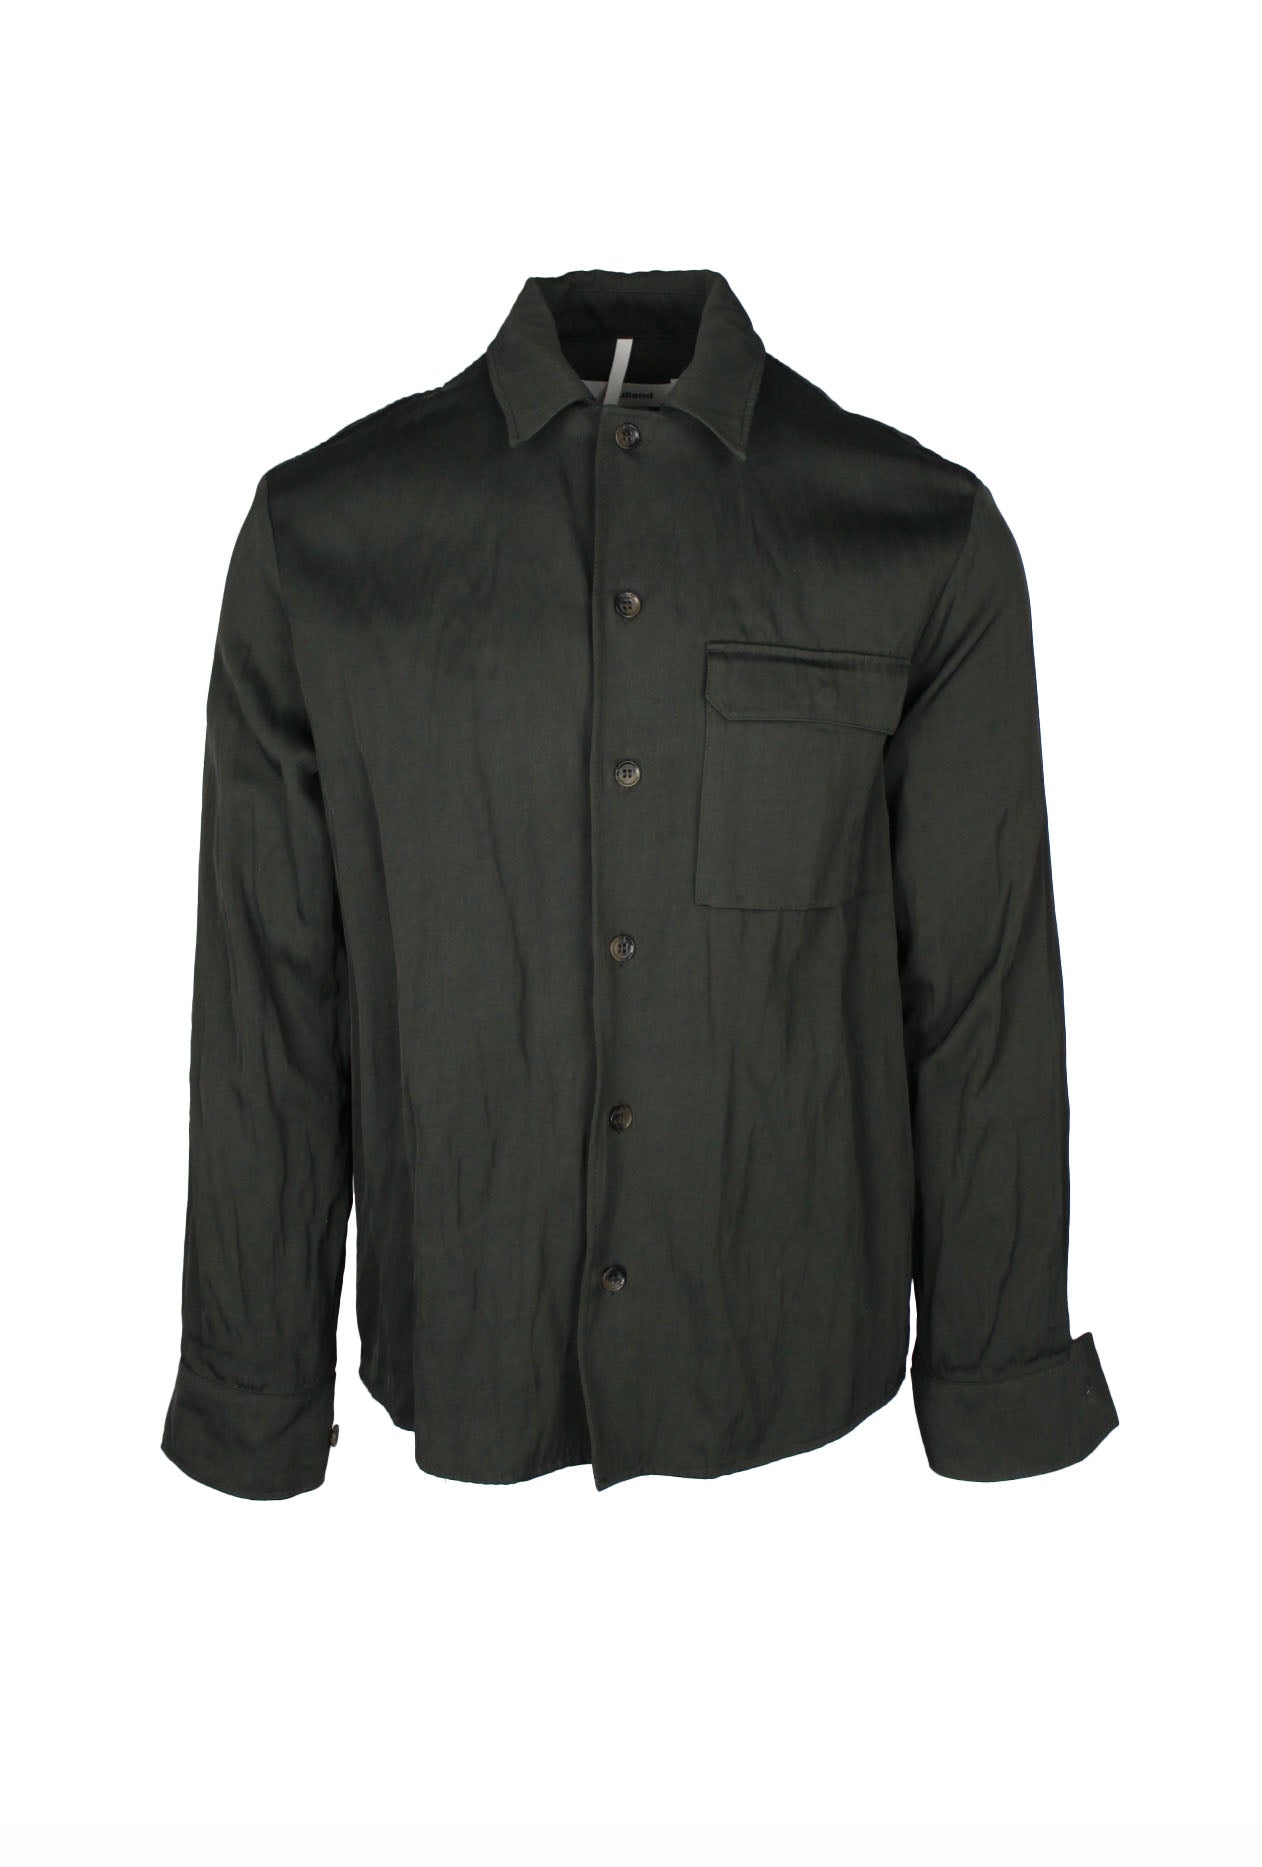 front view of soulland dark green long sleeve button up shirt. features split magnetic closure left breast pocket and buttons at cuffs.